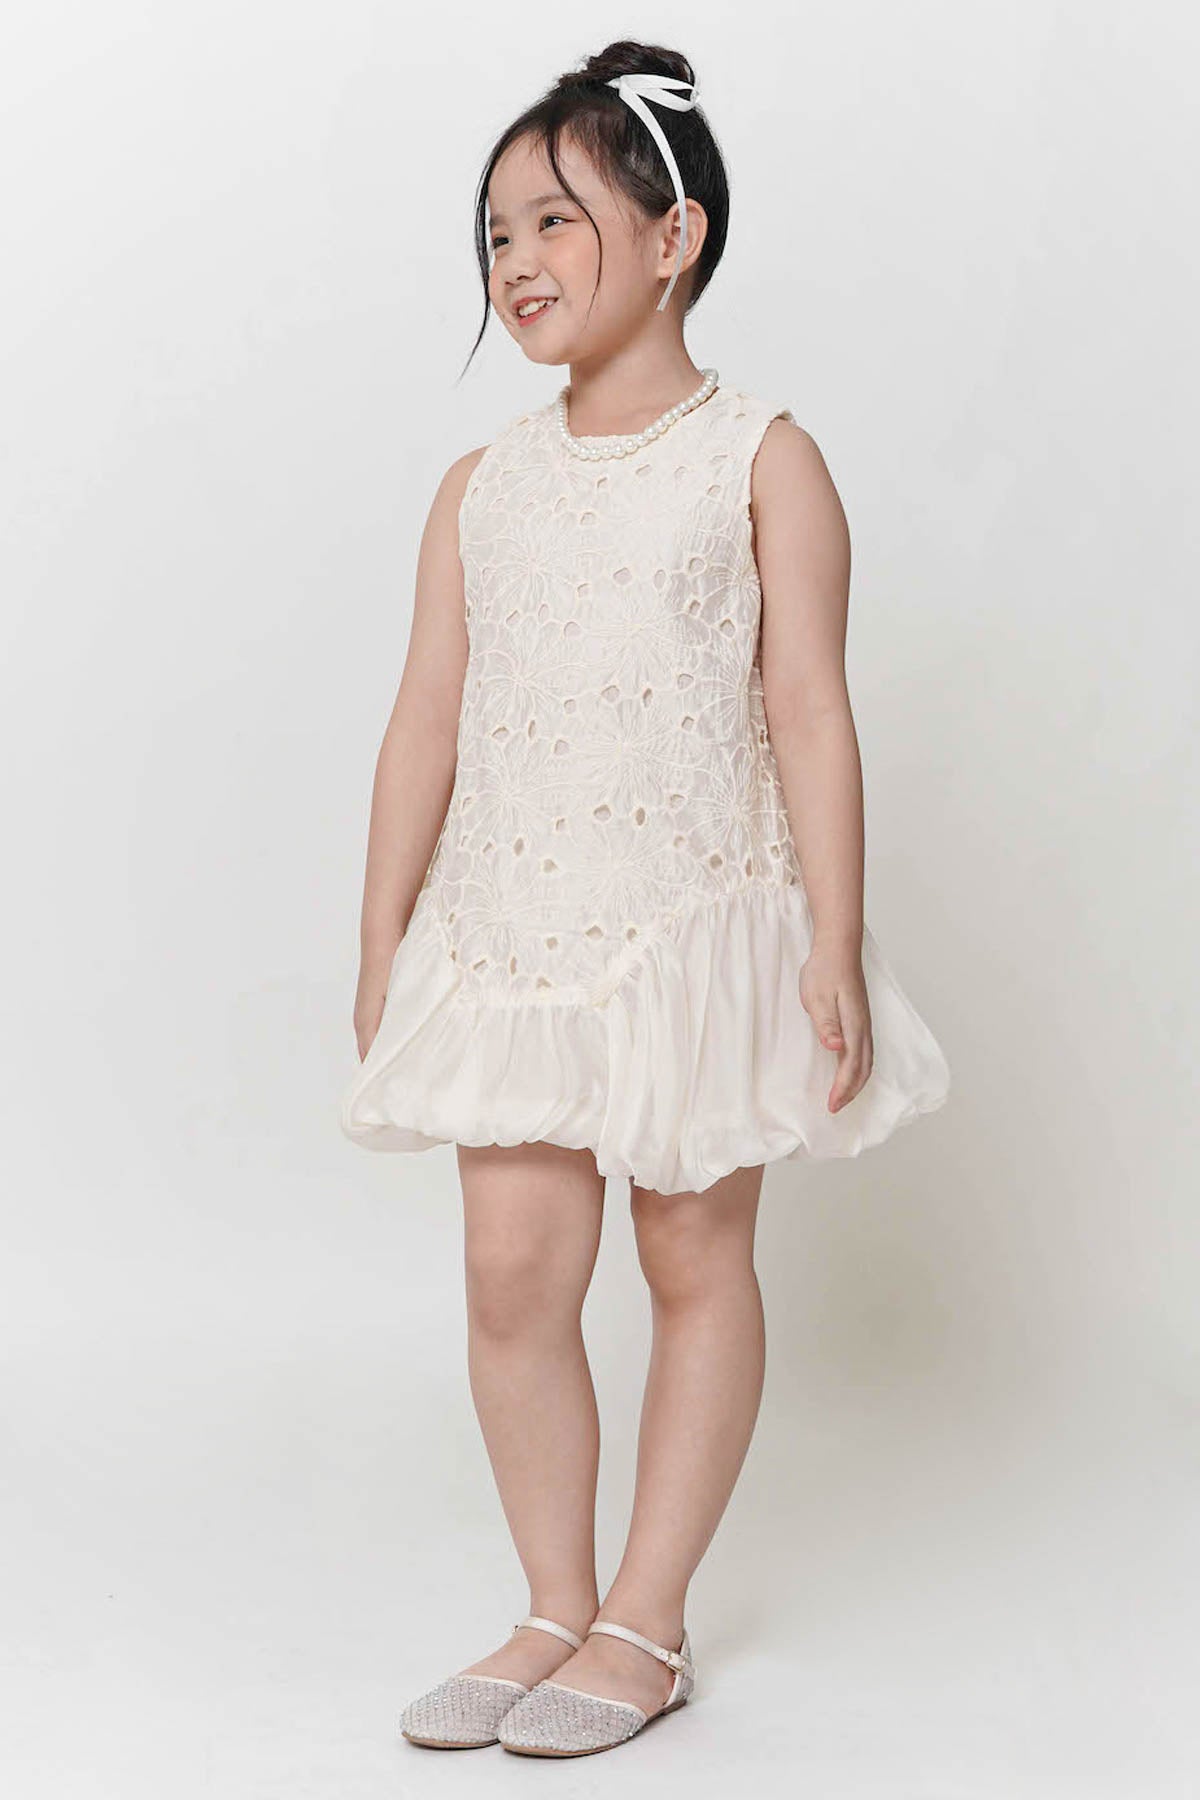 Estelle Lace Dress with Pearl Necklace